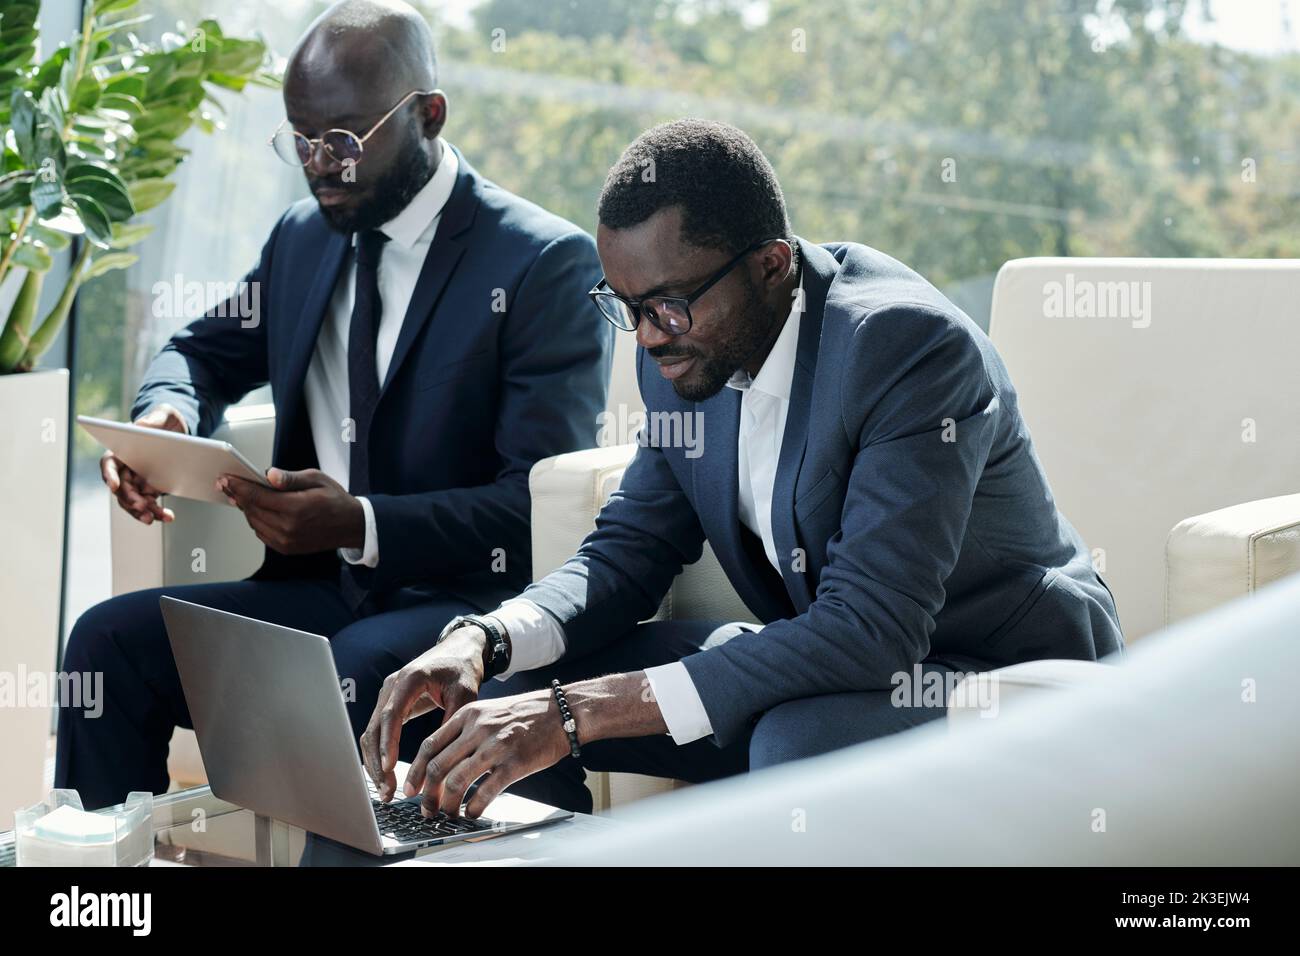 Young serious black man in formalwear typing on laptop keypad while sitting in armchair against male coworker using tablet Stock Photo